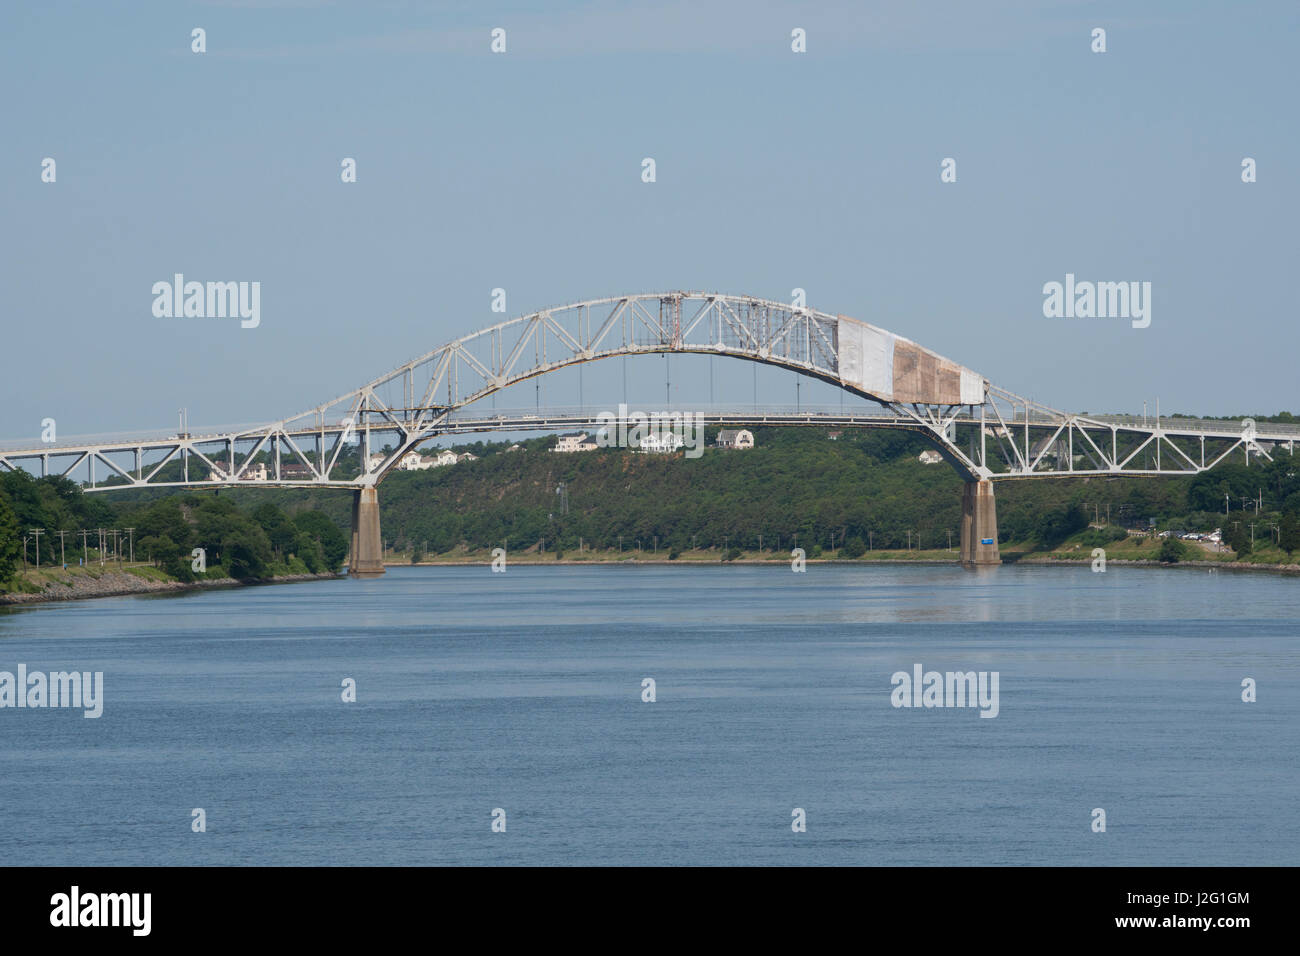 Massachusetts, Cape Cod, Atlantic Intracoastal Waterway. Cape Cod Canal, artificial waterway connecting Cape Cod Bay in the north to Buzzards Bay in the south. Sagamore Bridge. Stock Photo